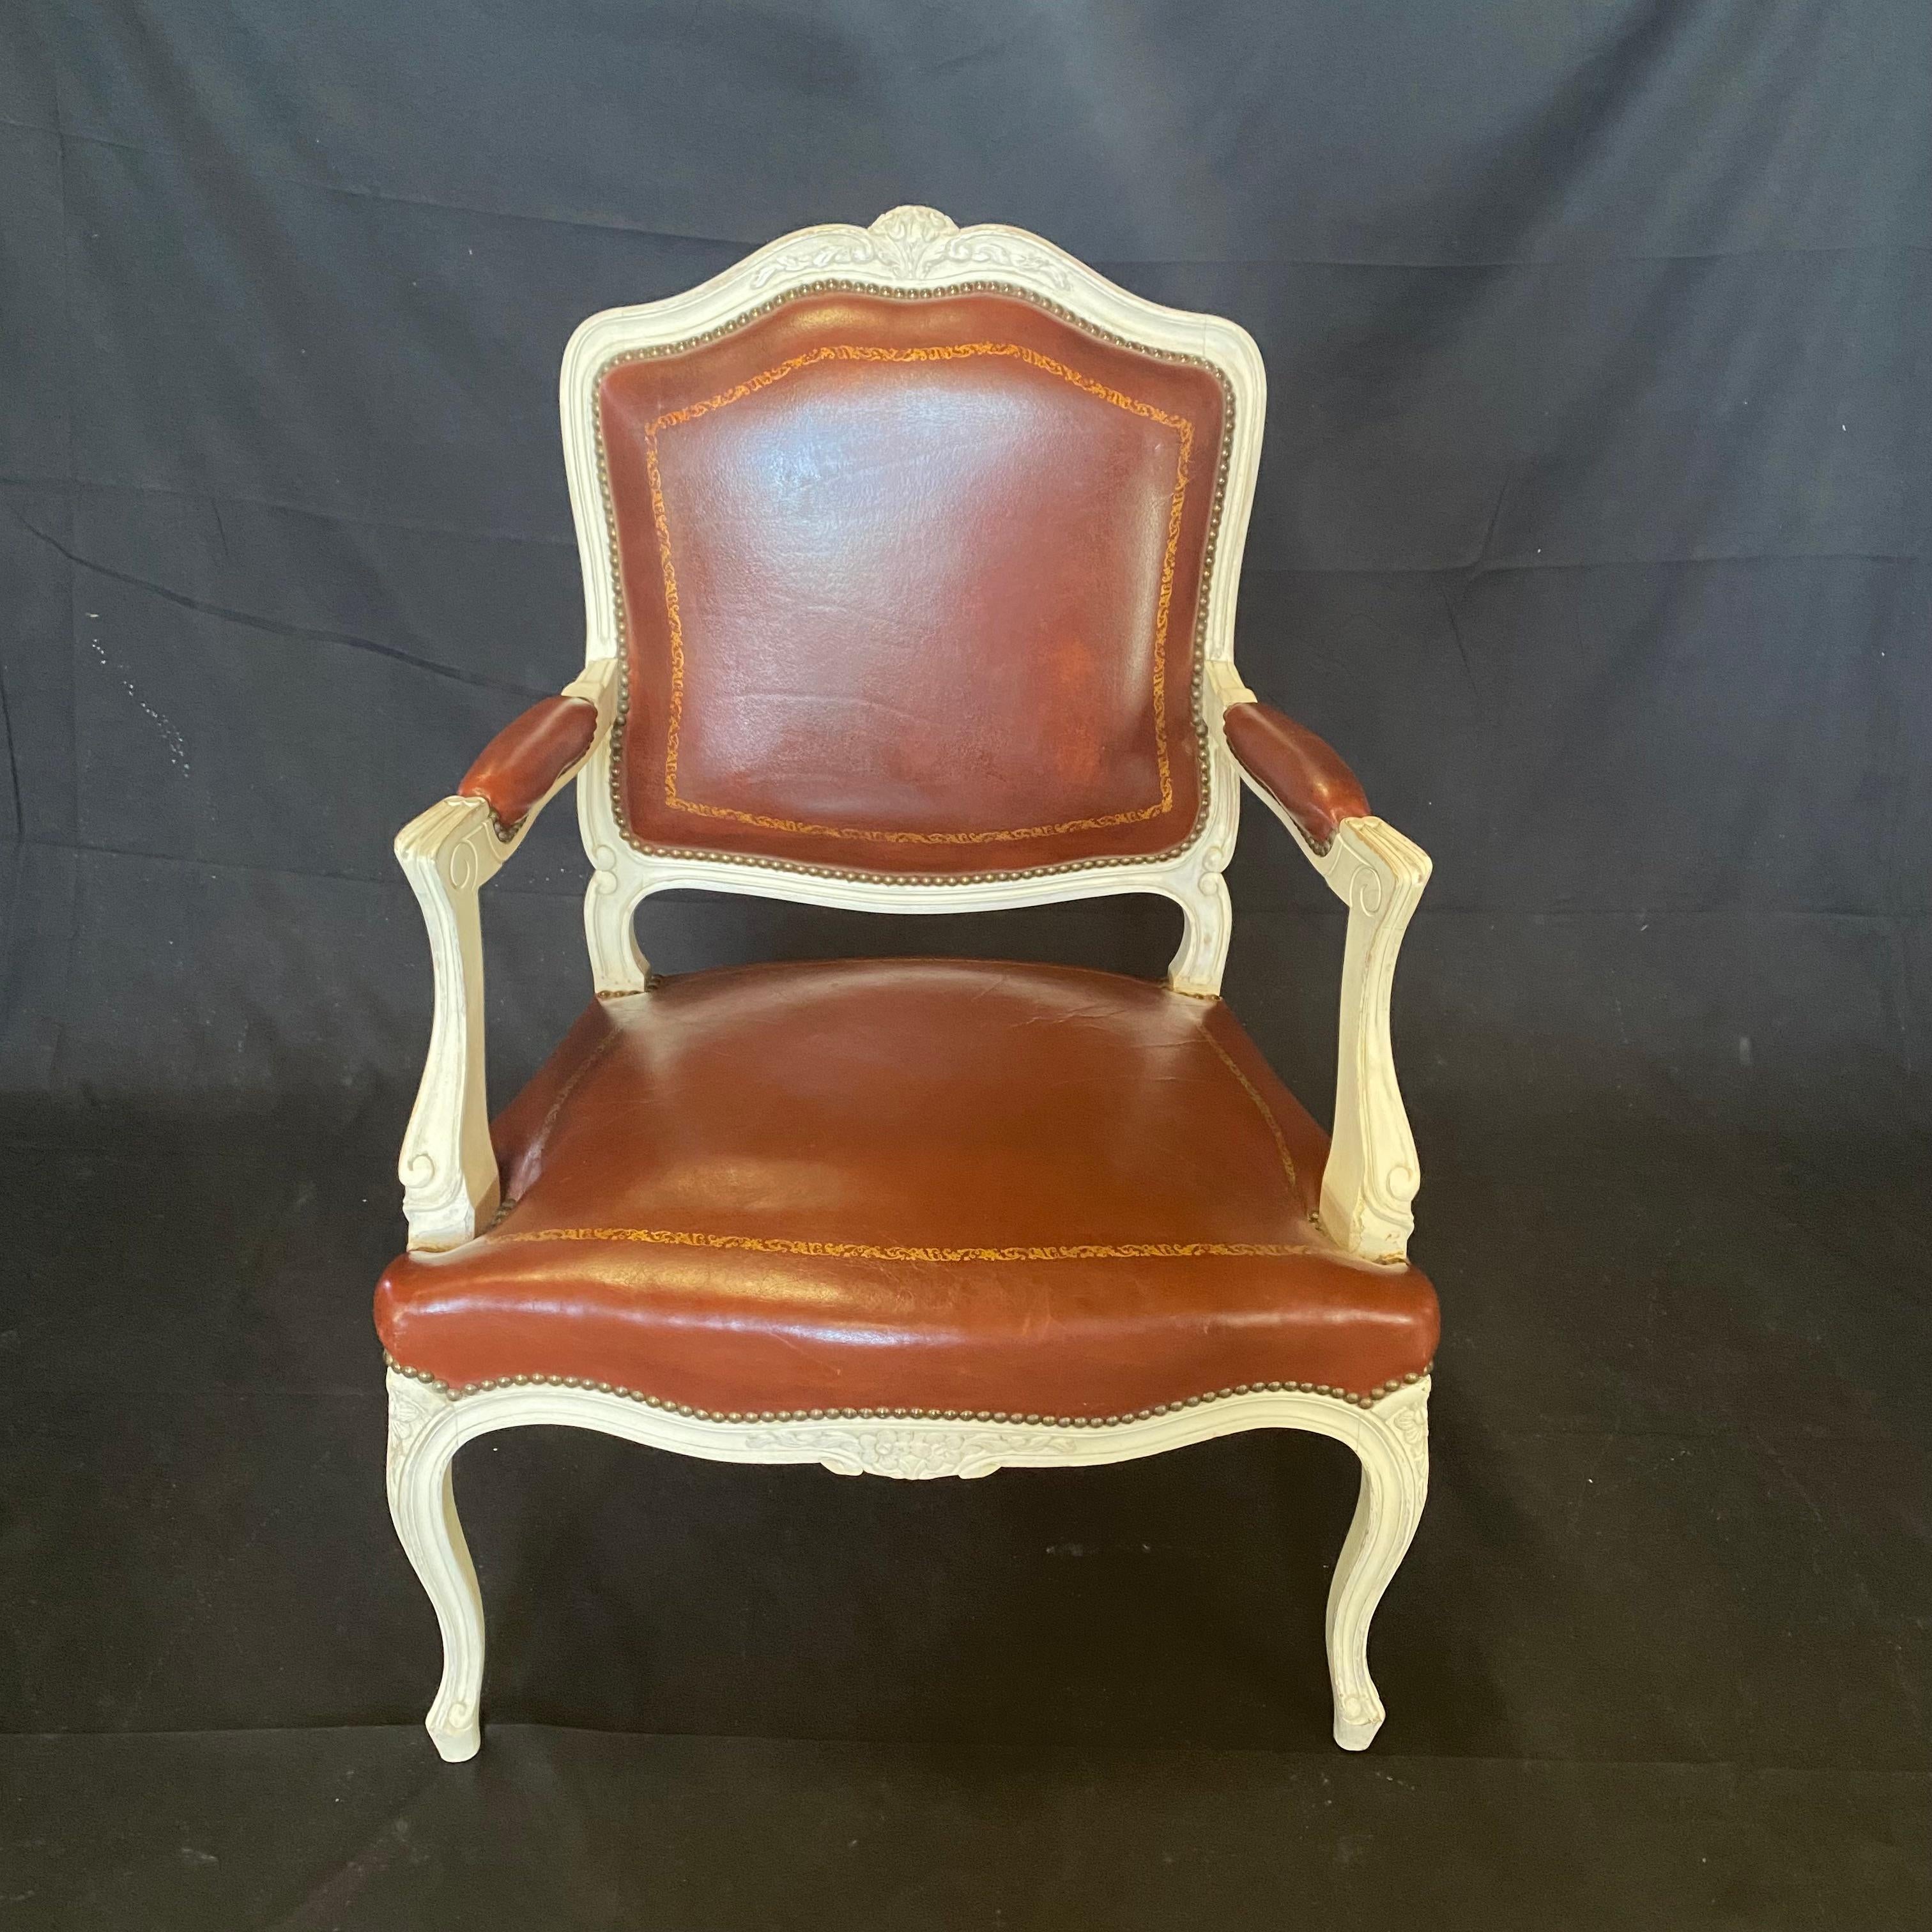 Stunning Set of Seven French Louis XV Leather Embossed Armchairs or Fauteuils, to be used in any room of the home. Can be used as elegant dining chairs, or armchairs in the living or sitting room or study. Ivory painted carved walnut provides a